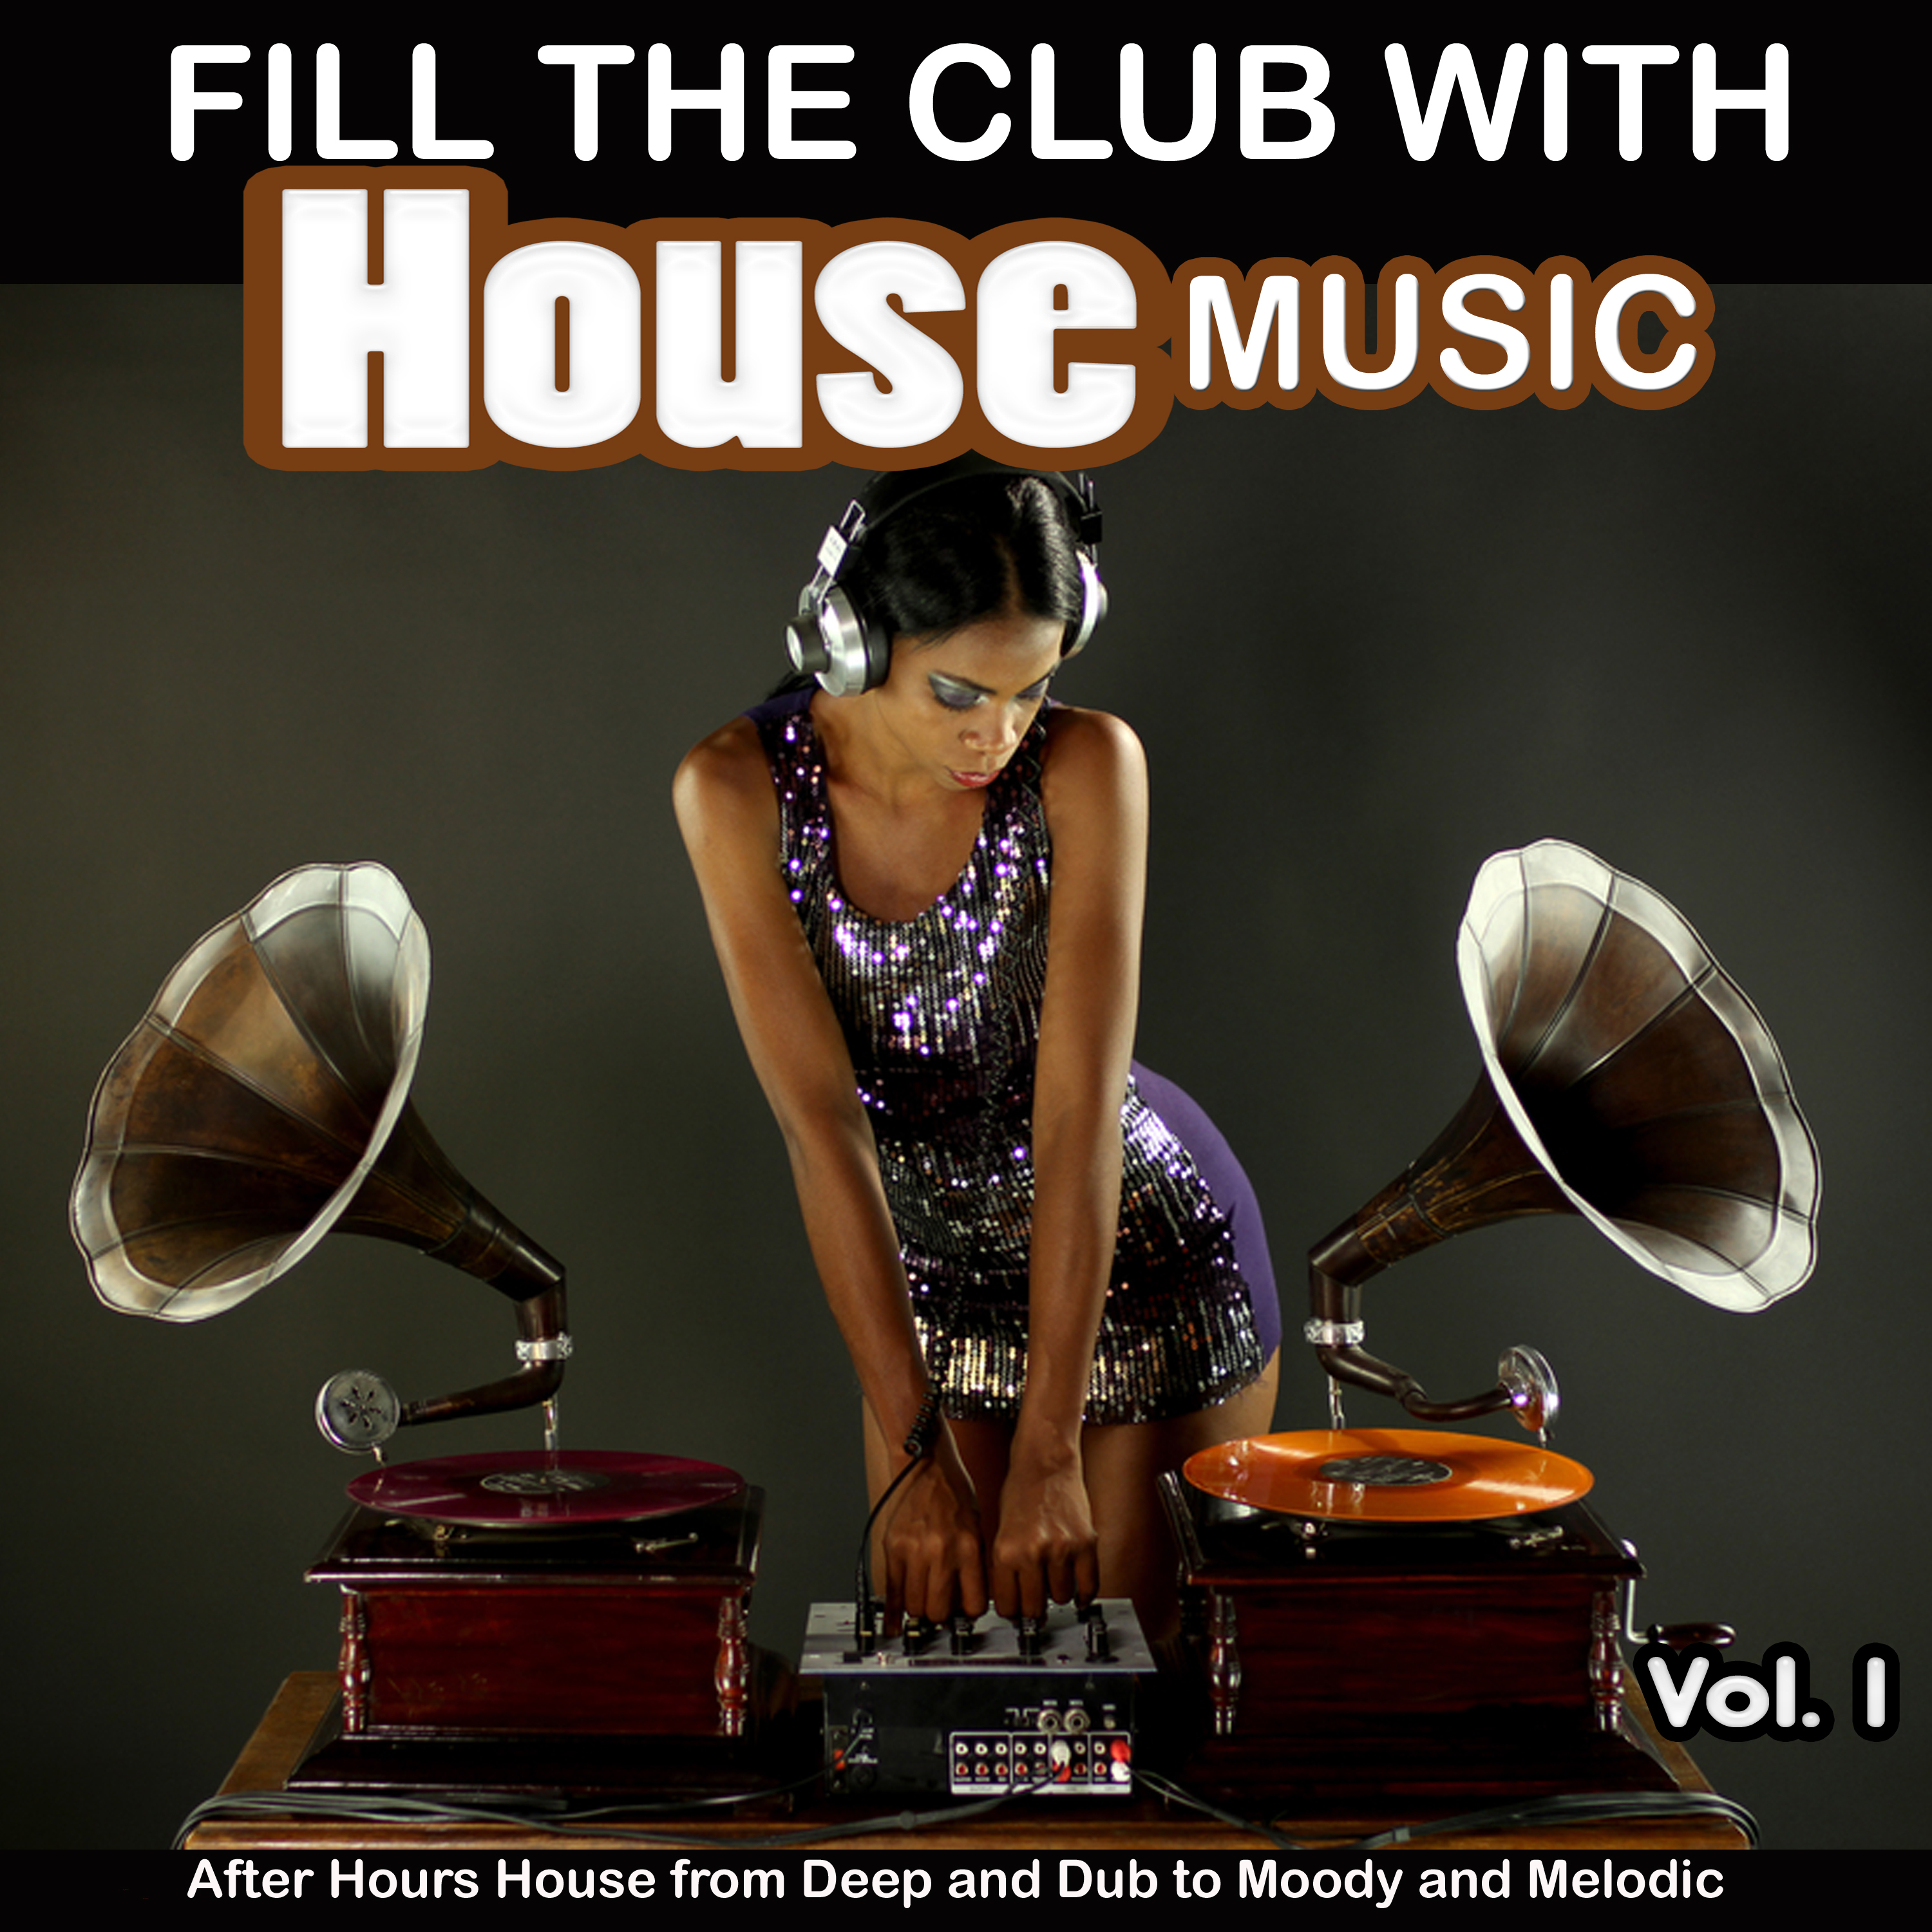 Fill the Club with House Music, Vol. 1 - After Hours House from Deep and Dub to Moody and Melodic